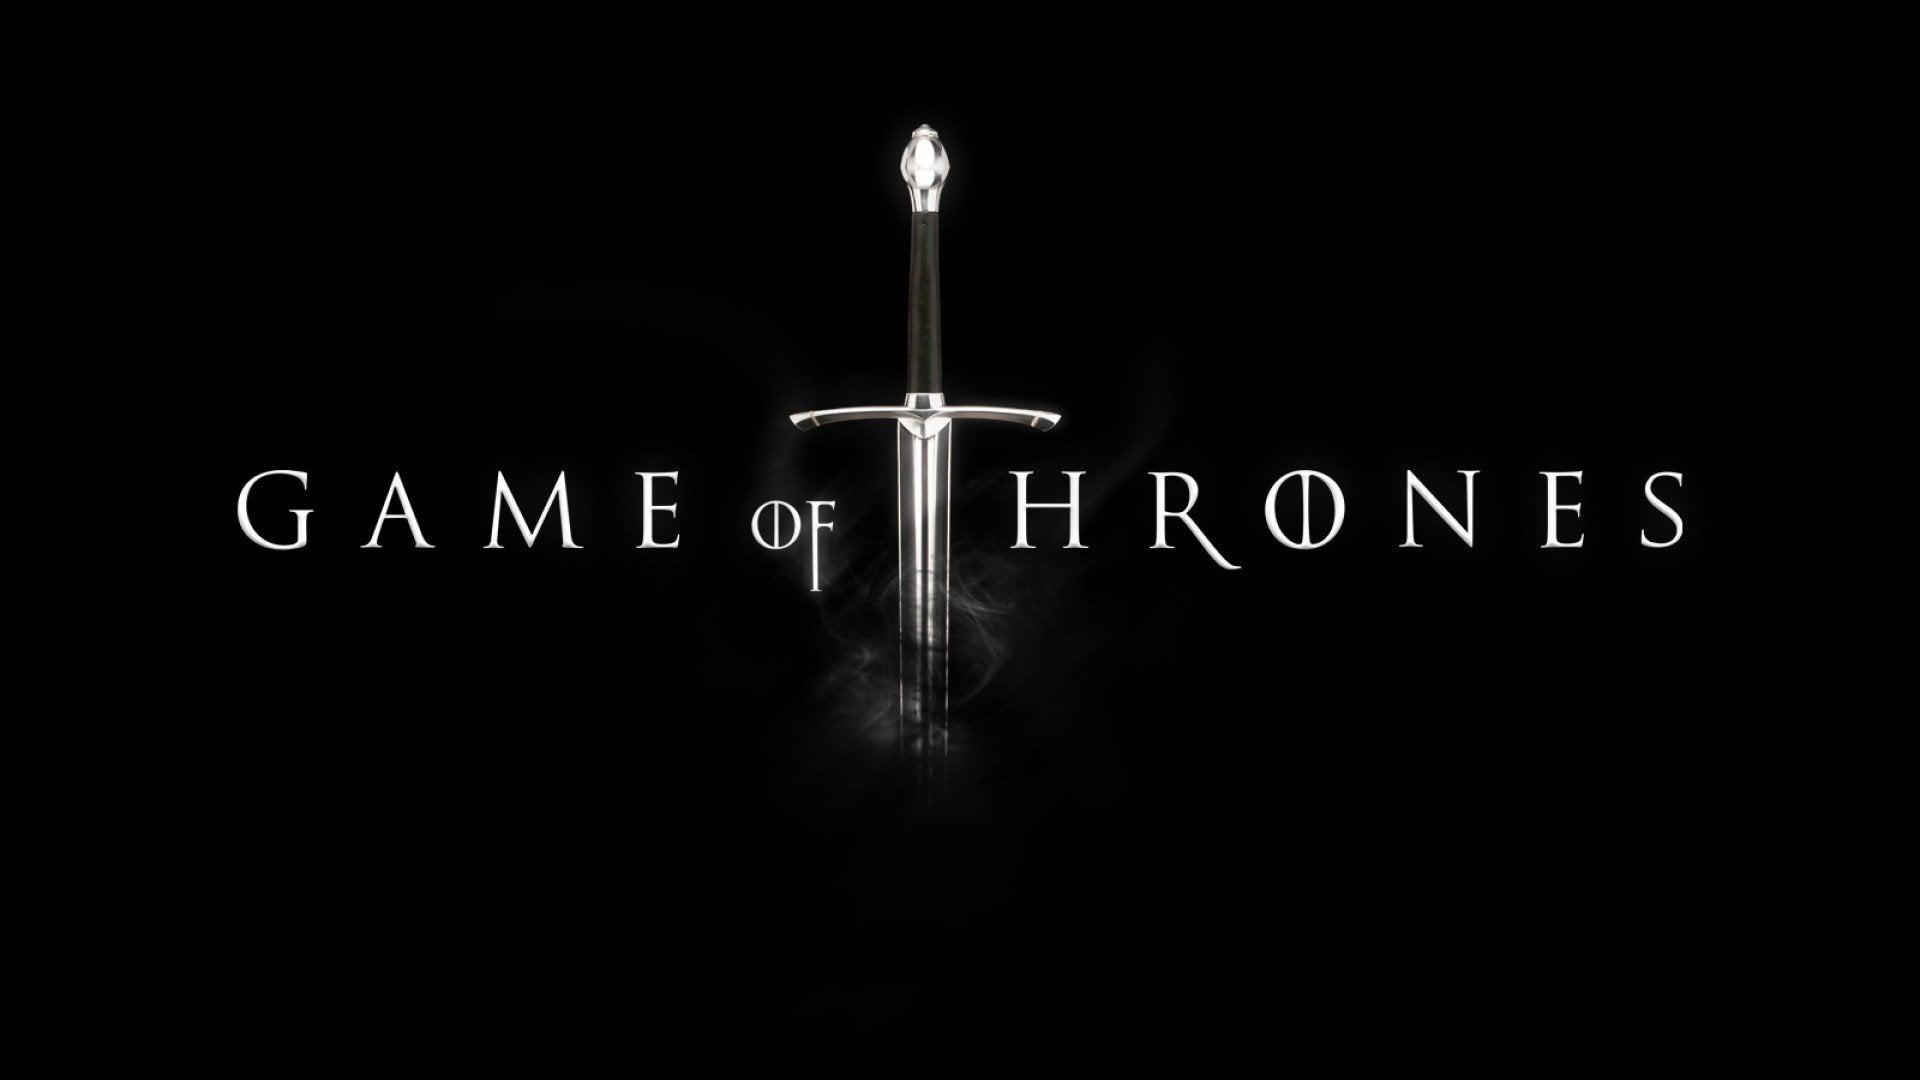 All Spoilers A collection of Game of Thrones wallpaper. Mostly 1920x1080